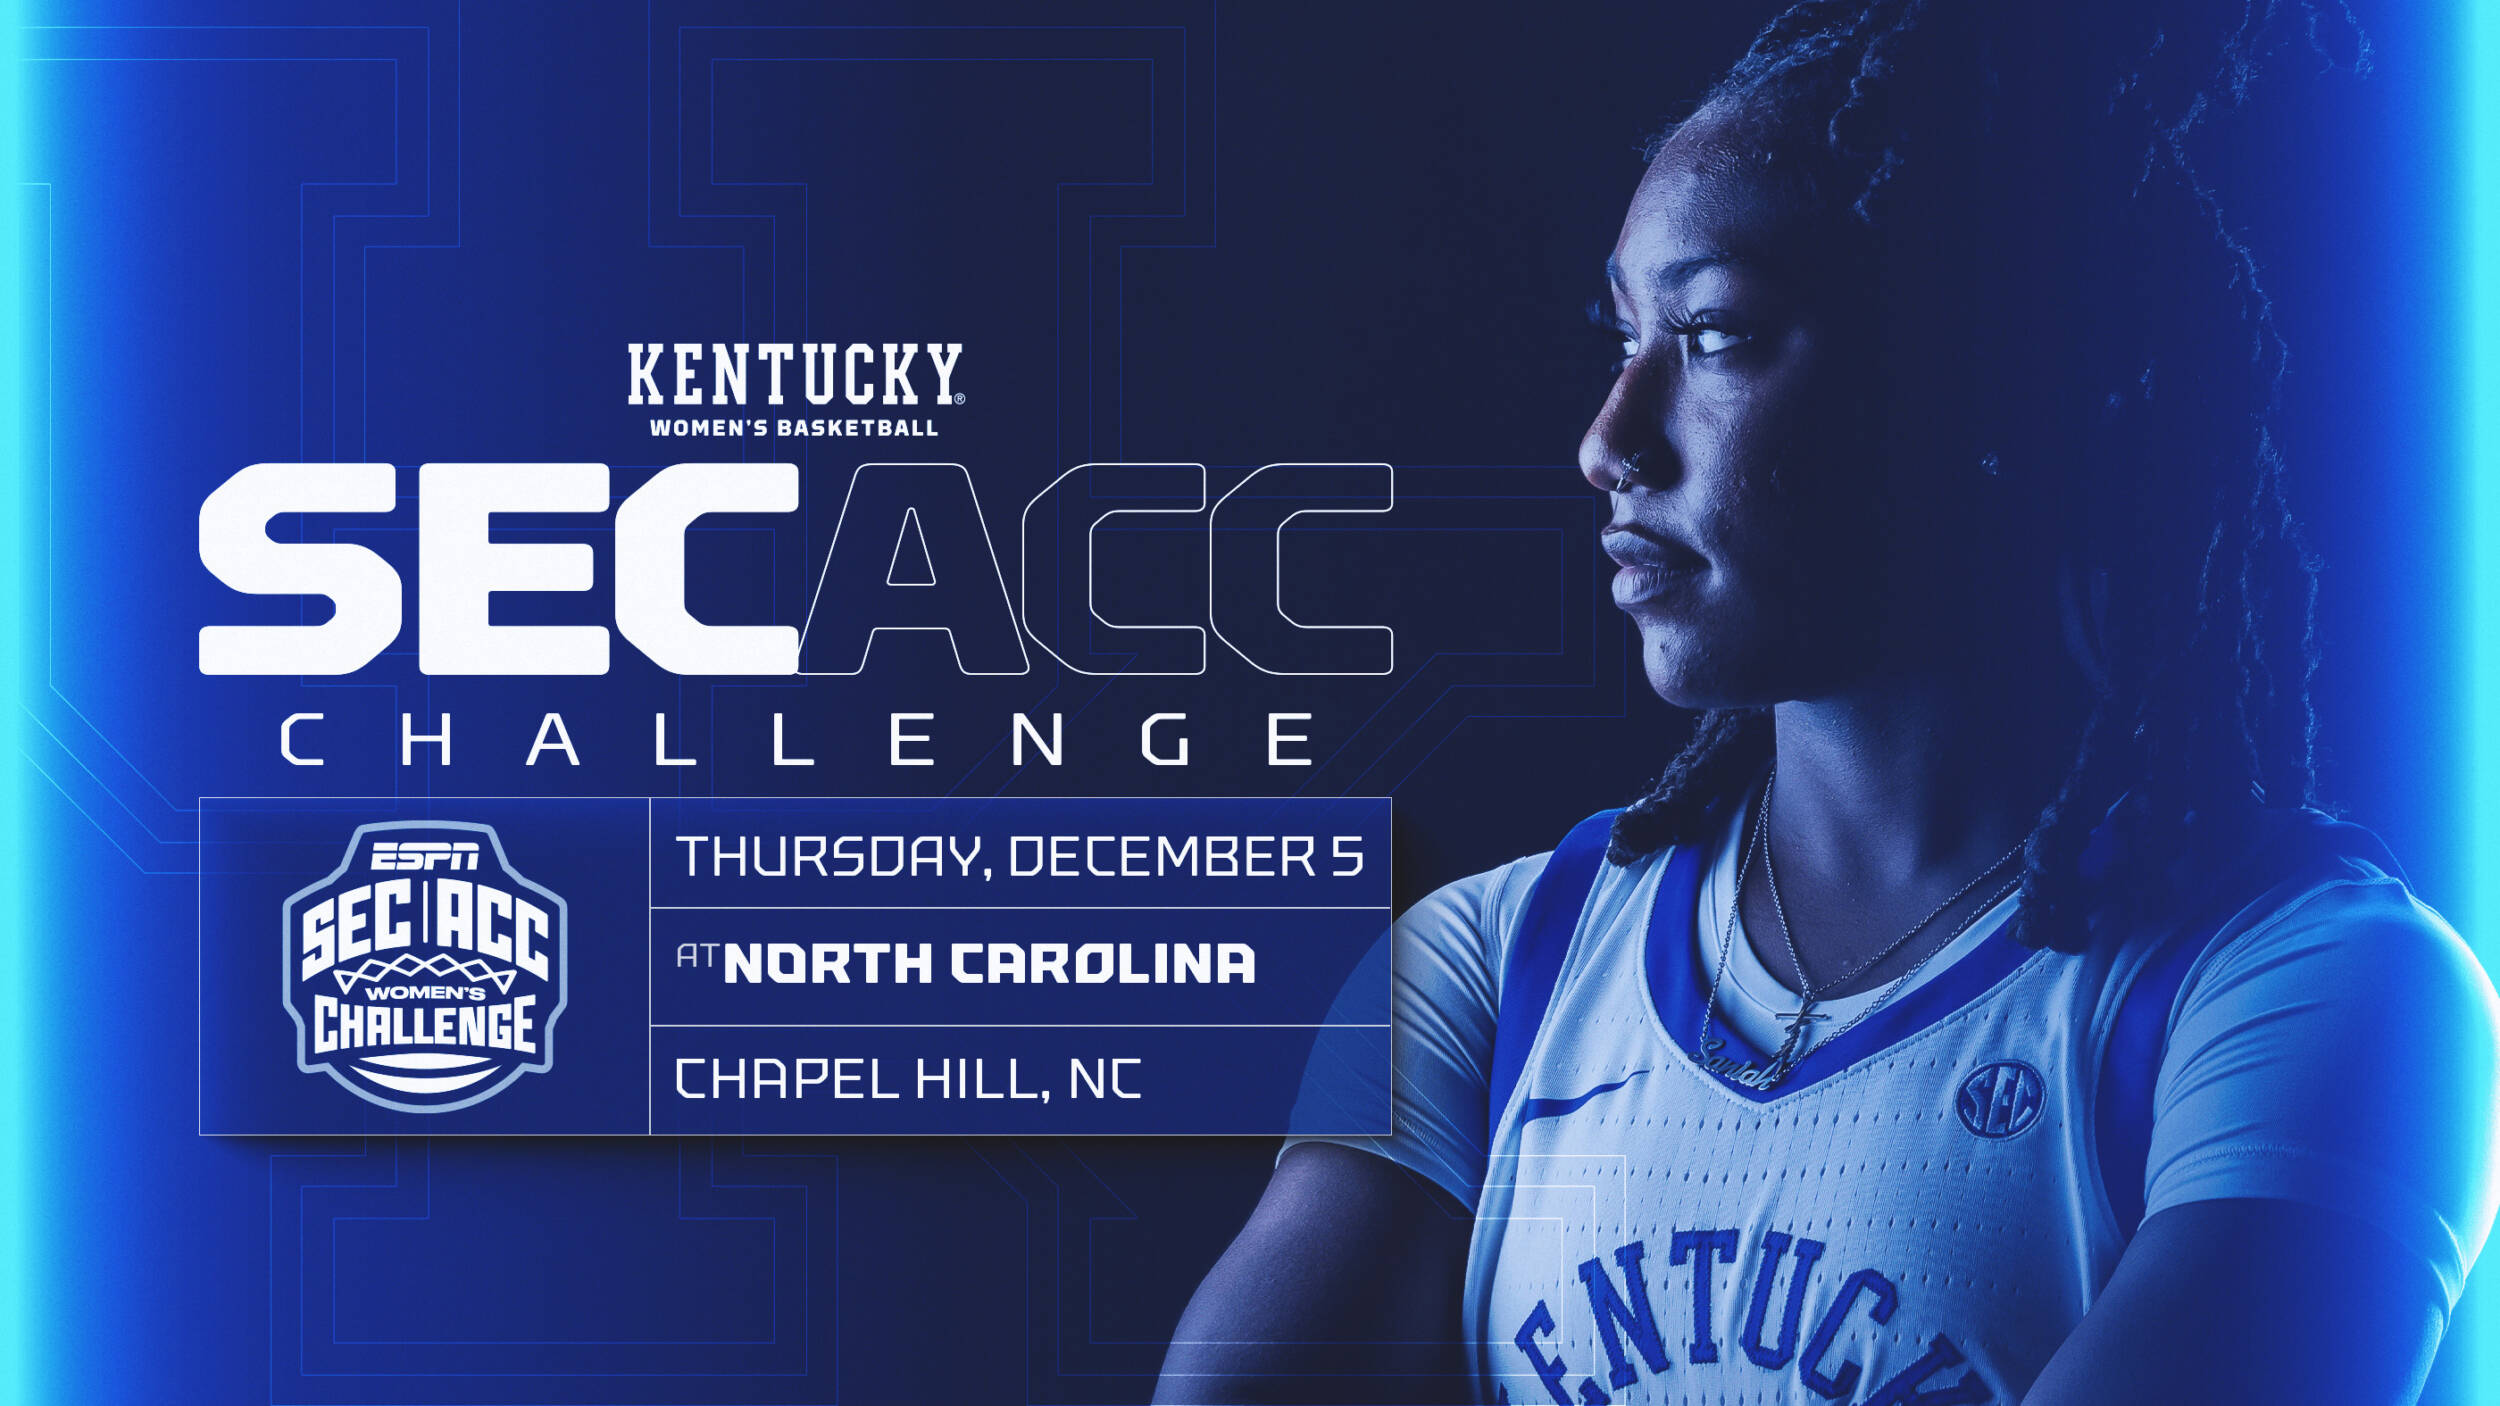 Kentucky, North Carolina Square Off in Chapel Hill for SEC/ACC Challenge on Dec. 5